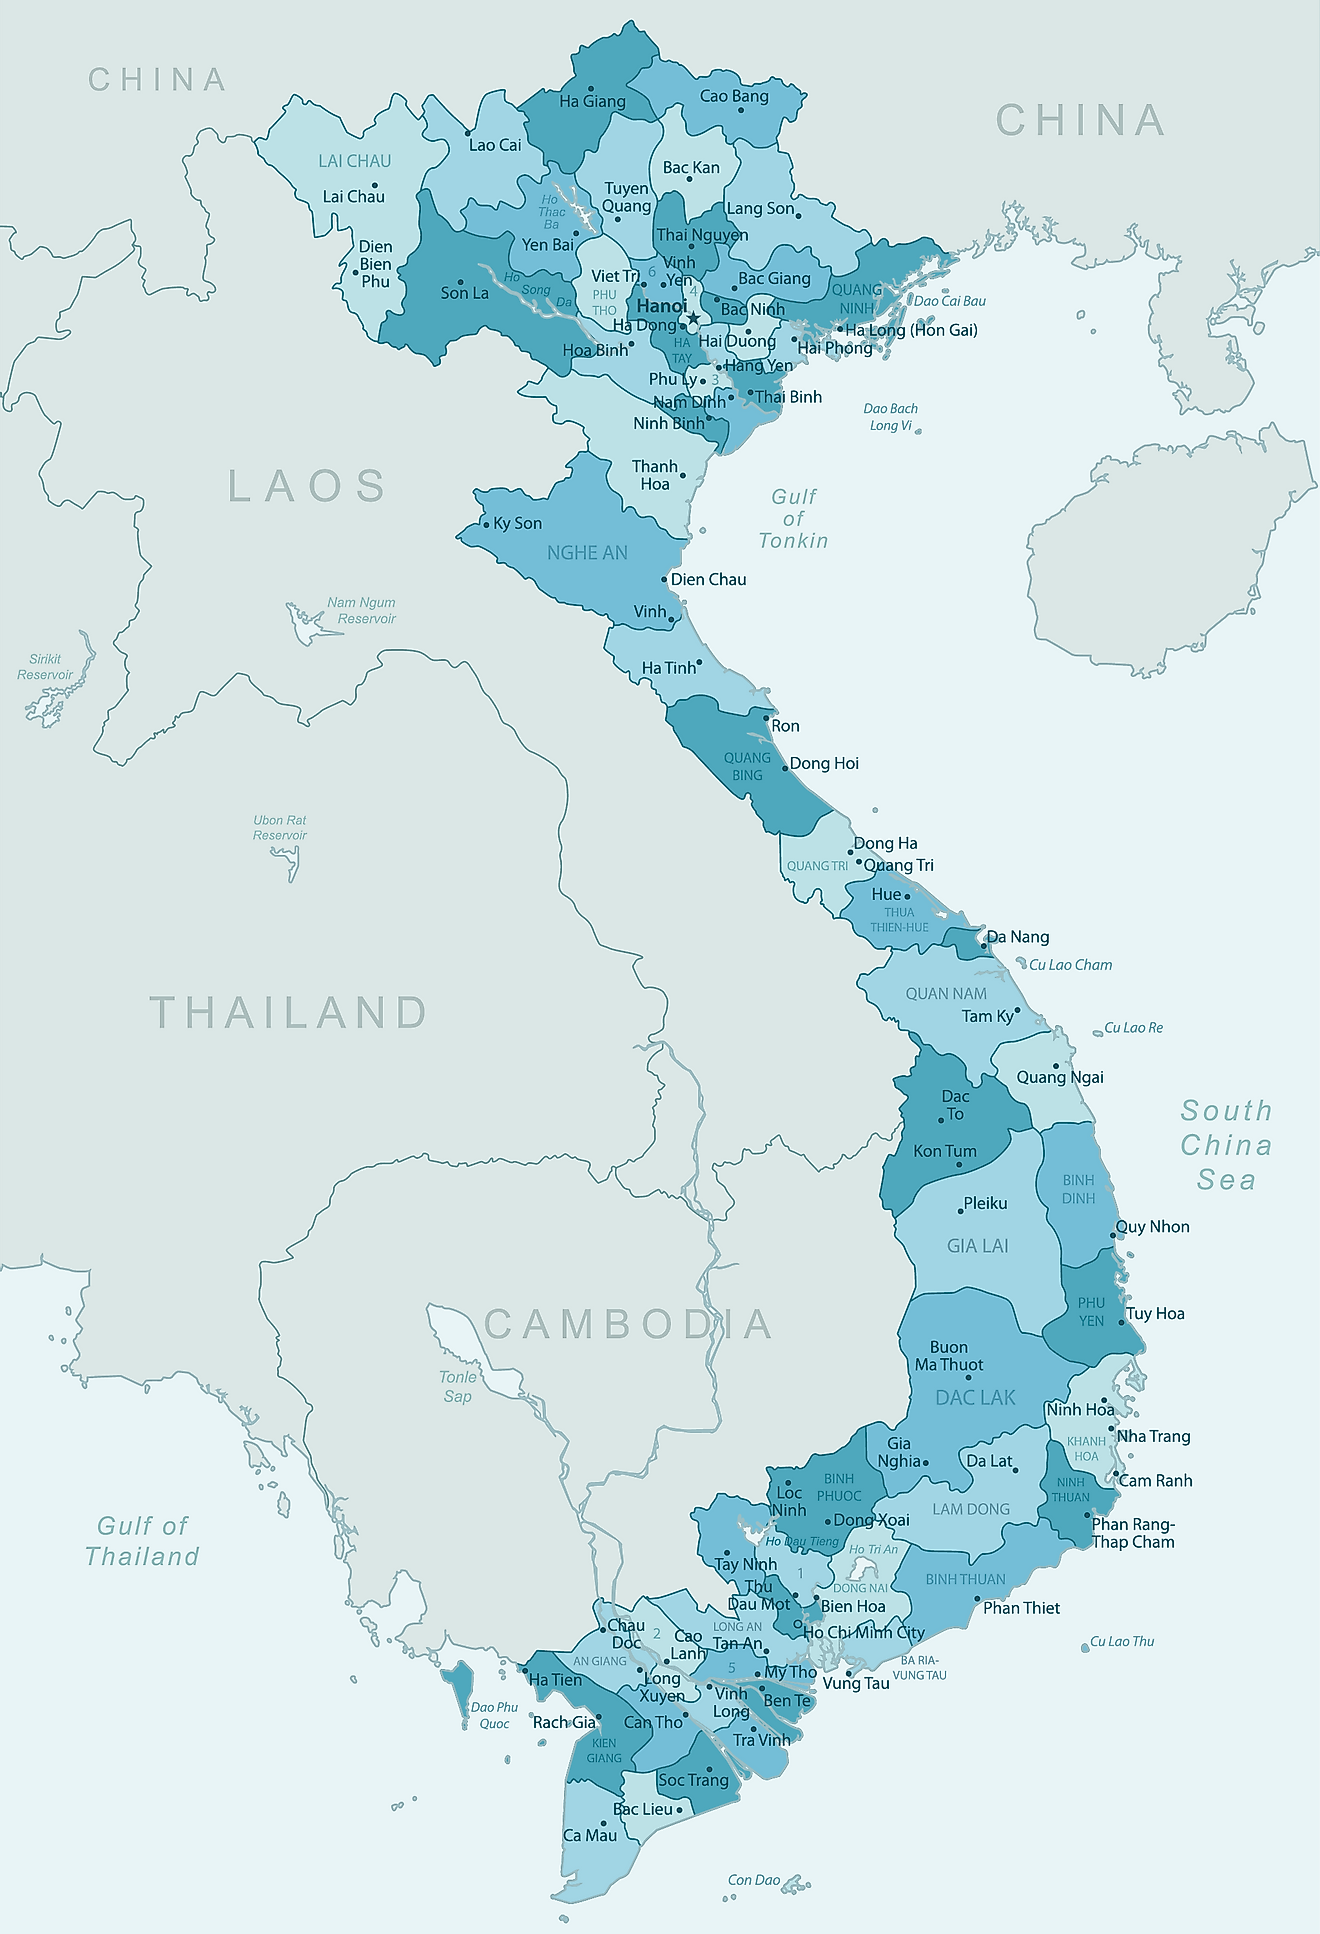 The Political Map of Vietnam showing the 58 provinces, their capitals, the 5 municipalities, and the capital city of Hanoi.